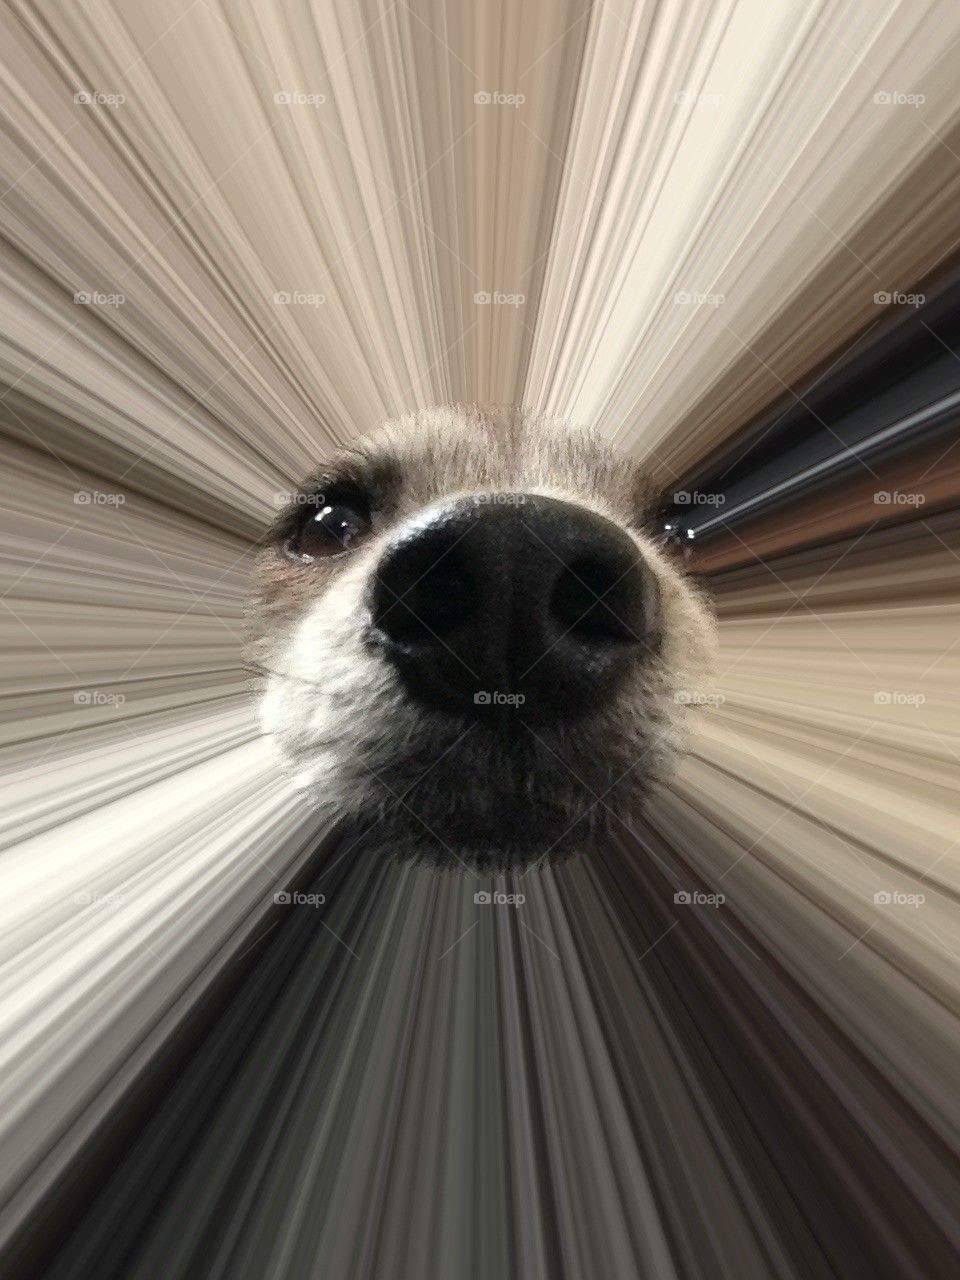 Dog face with ipad filter